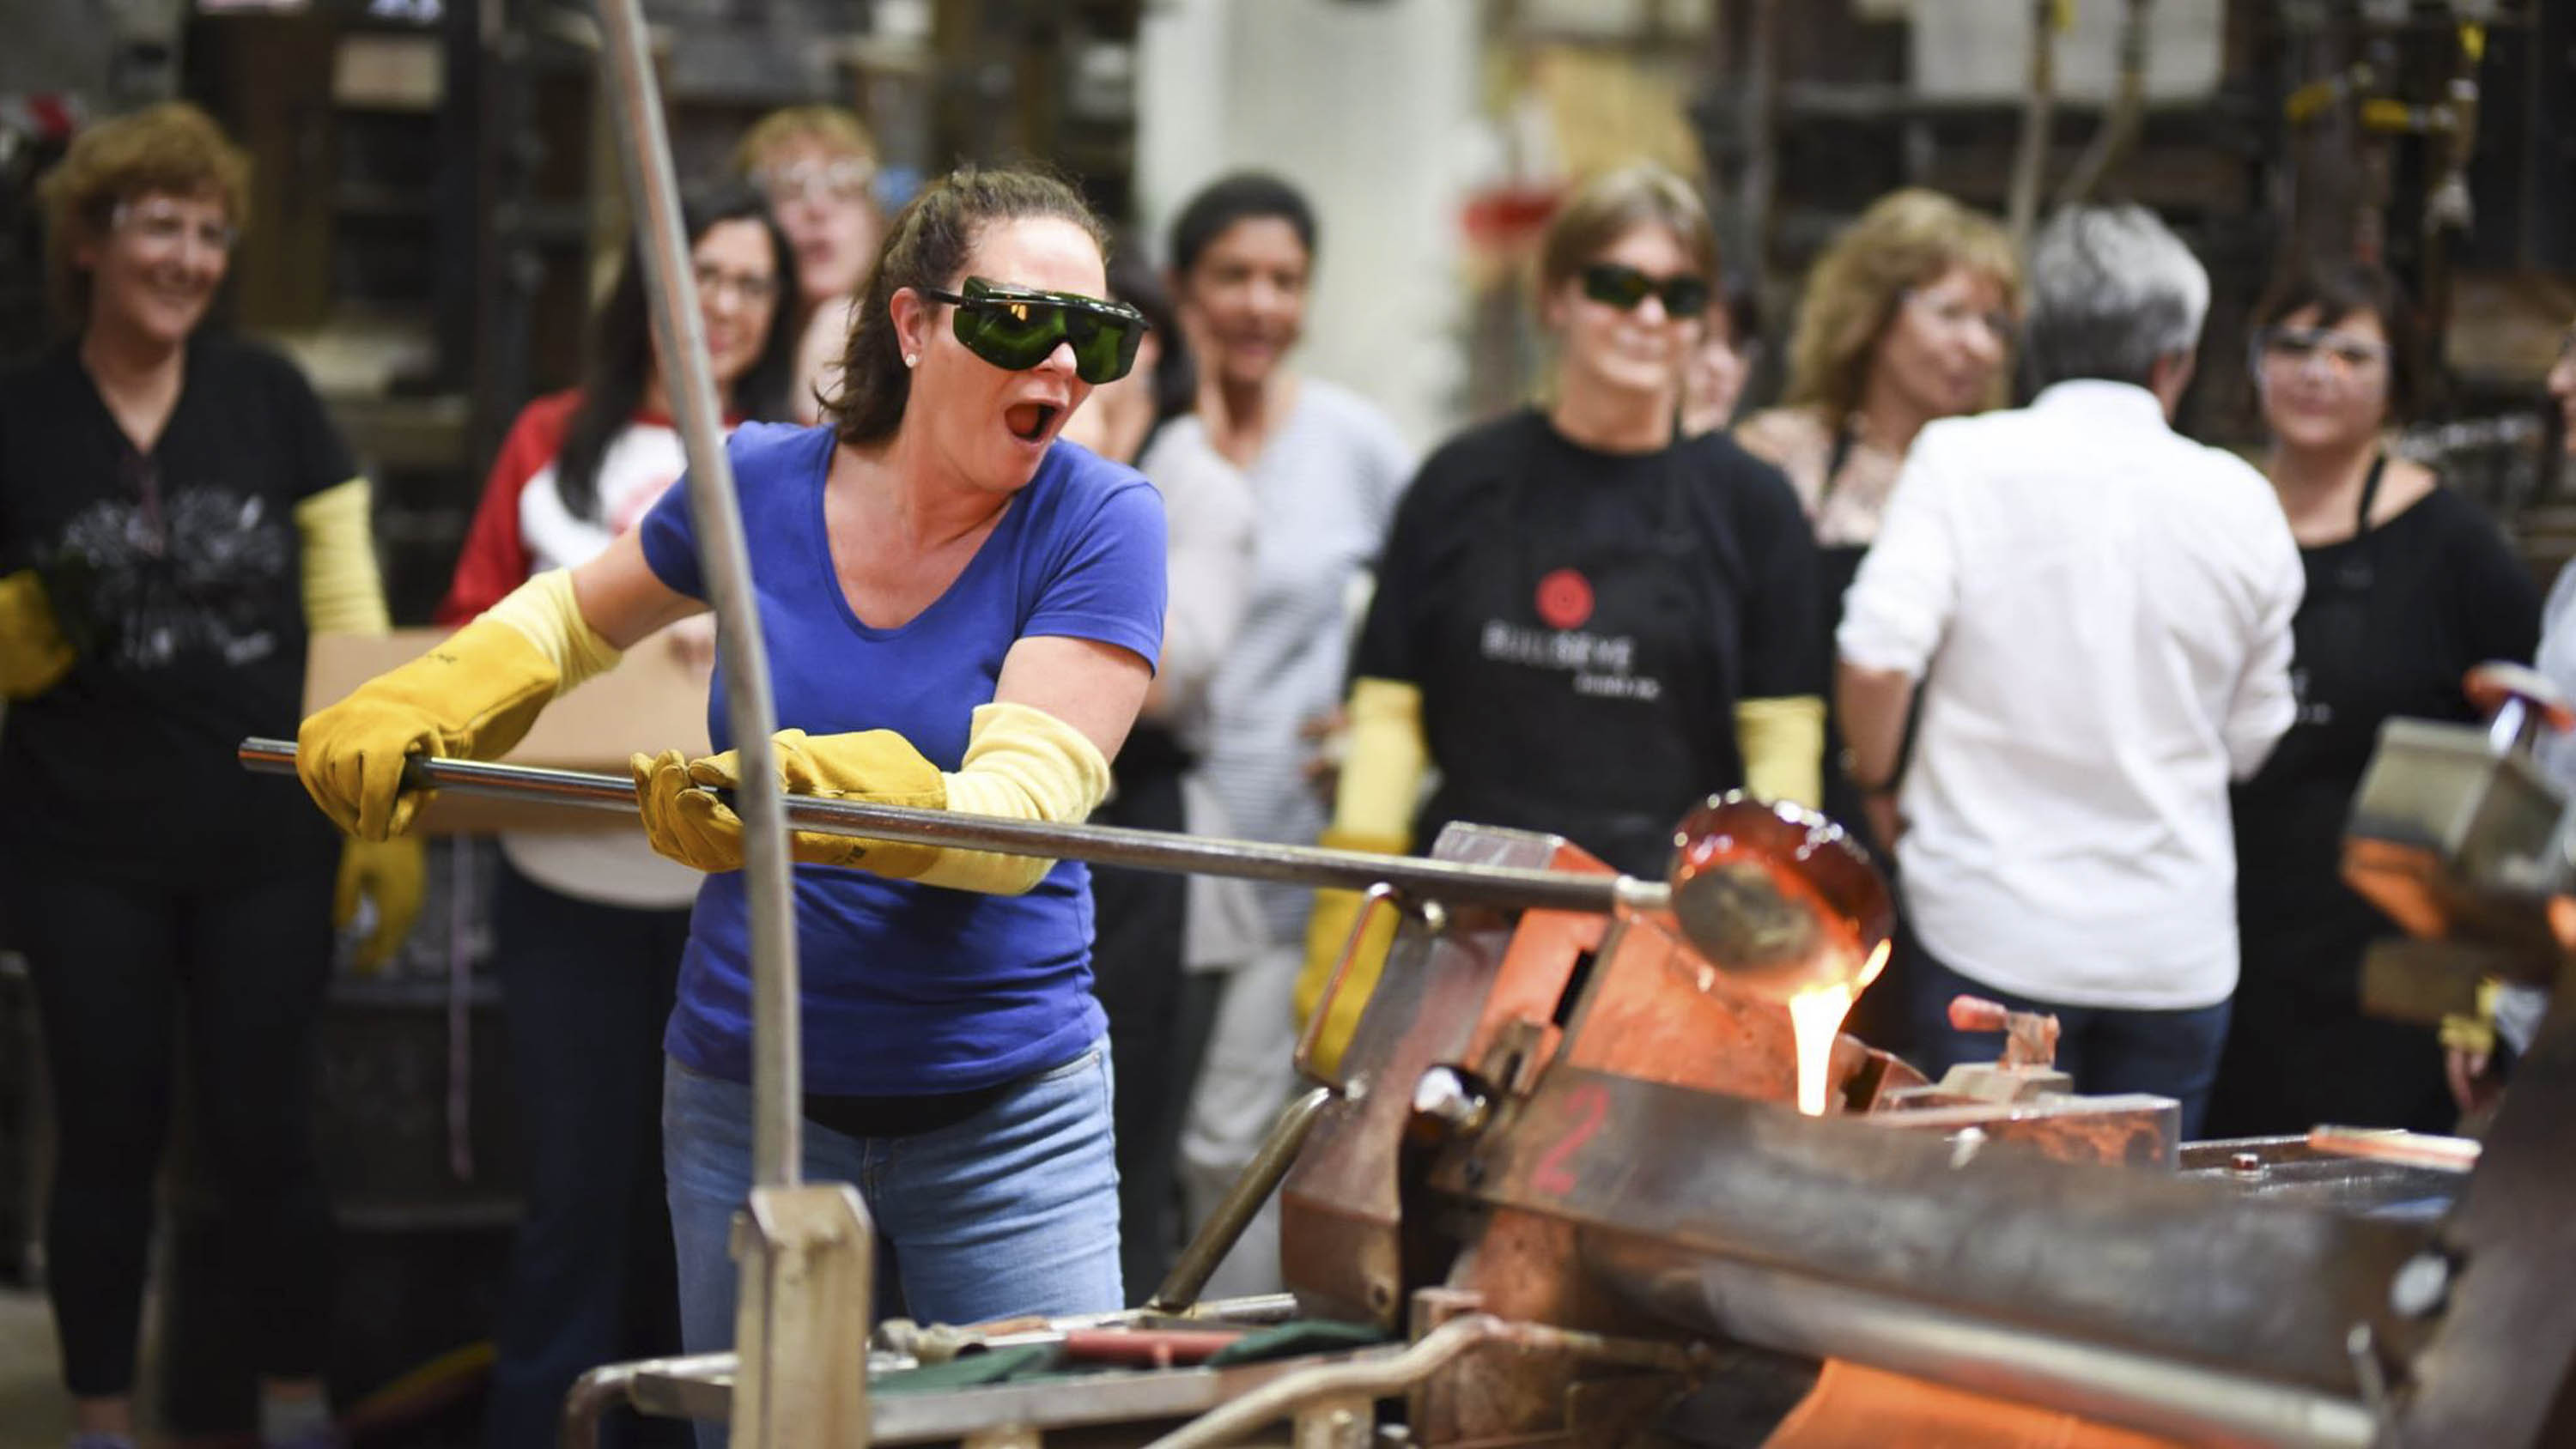 Glass-making at a workshop. A woman wearing safety glasses holds a long rod with molten glass on the end